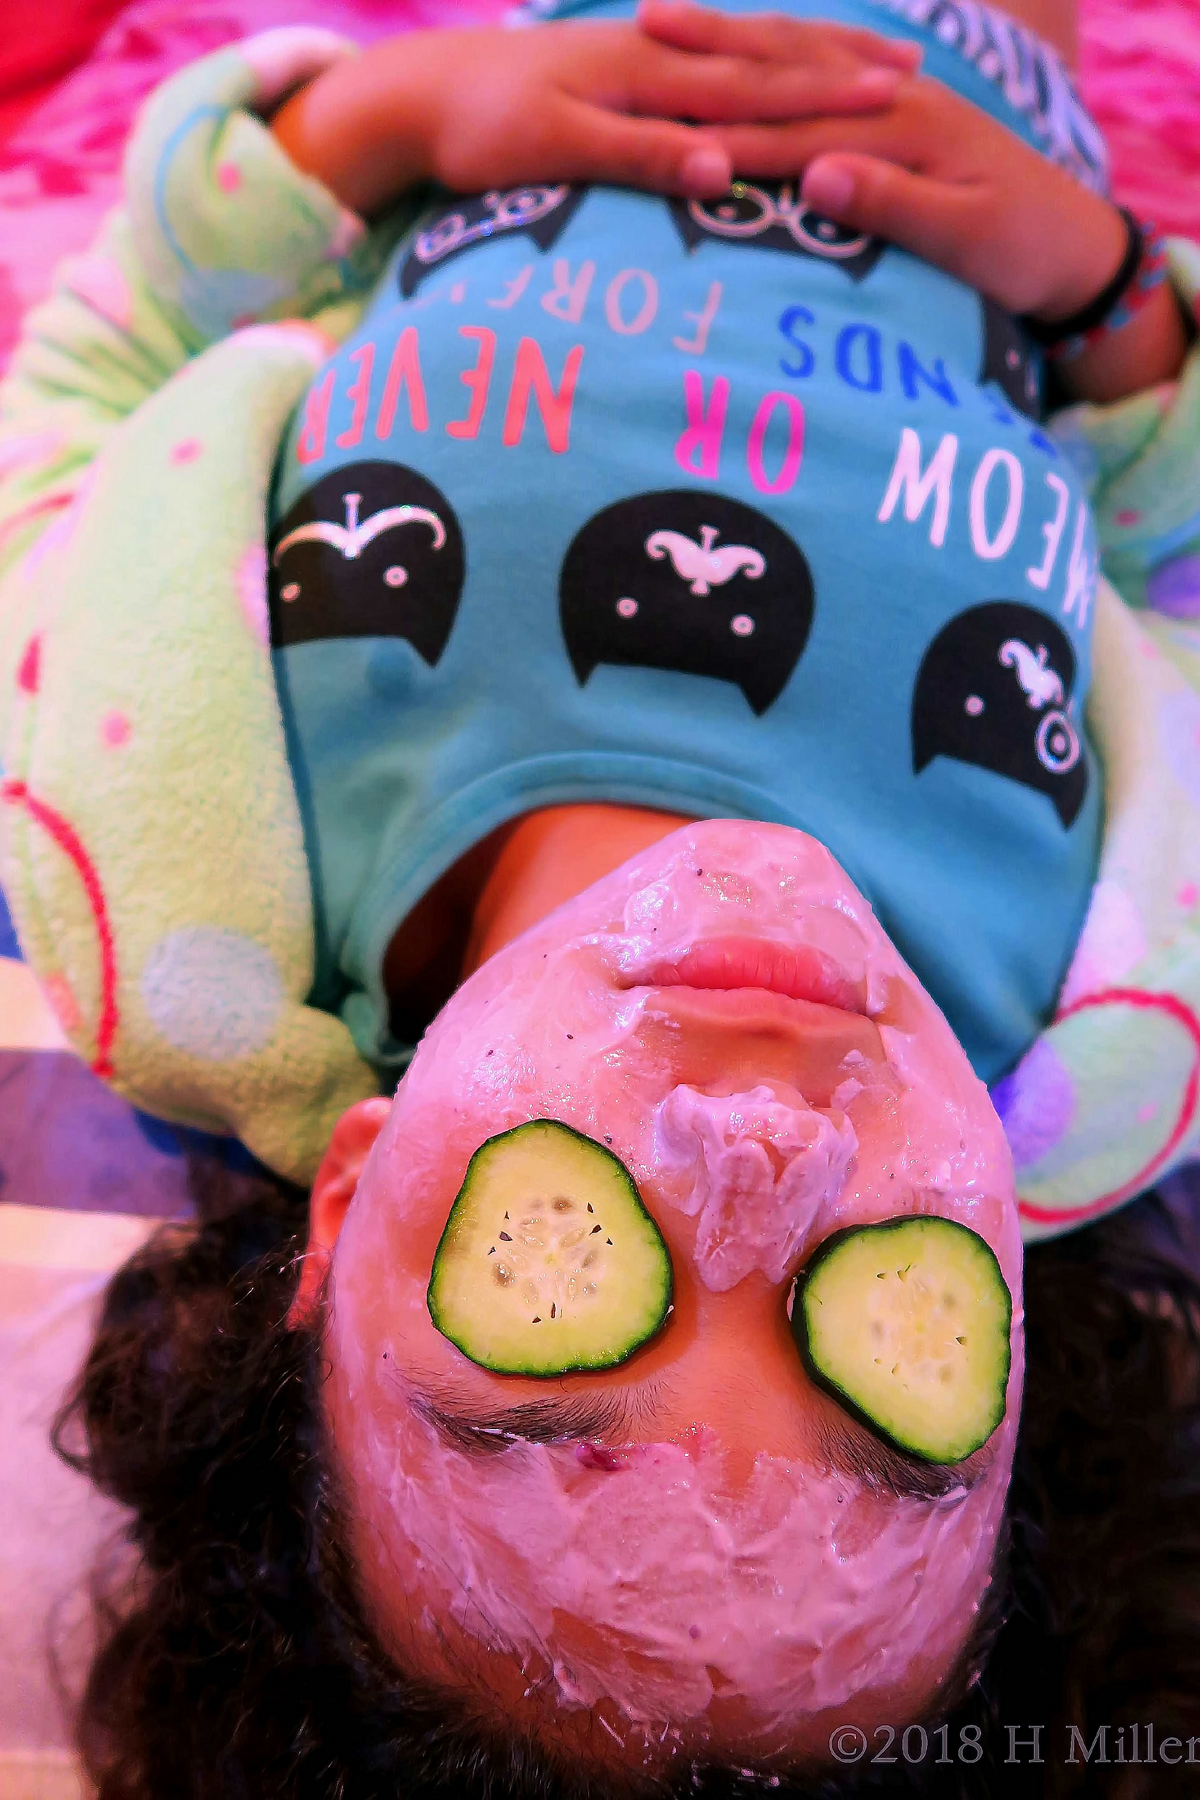 Strawberry Kids Facial Masque With Cukes Over The Eyes. 